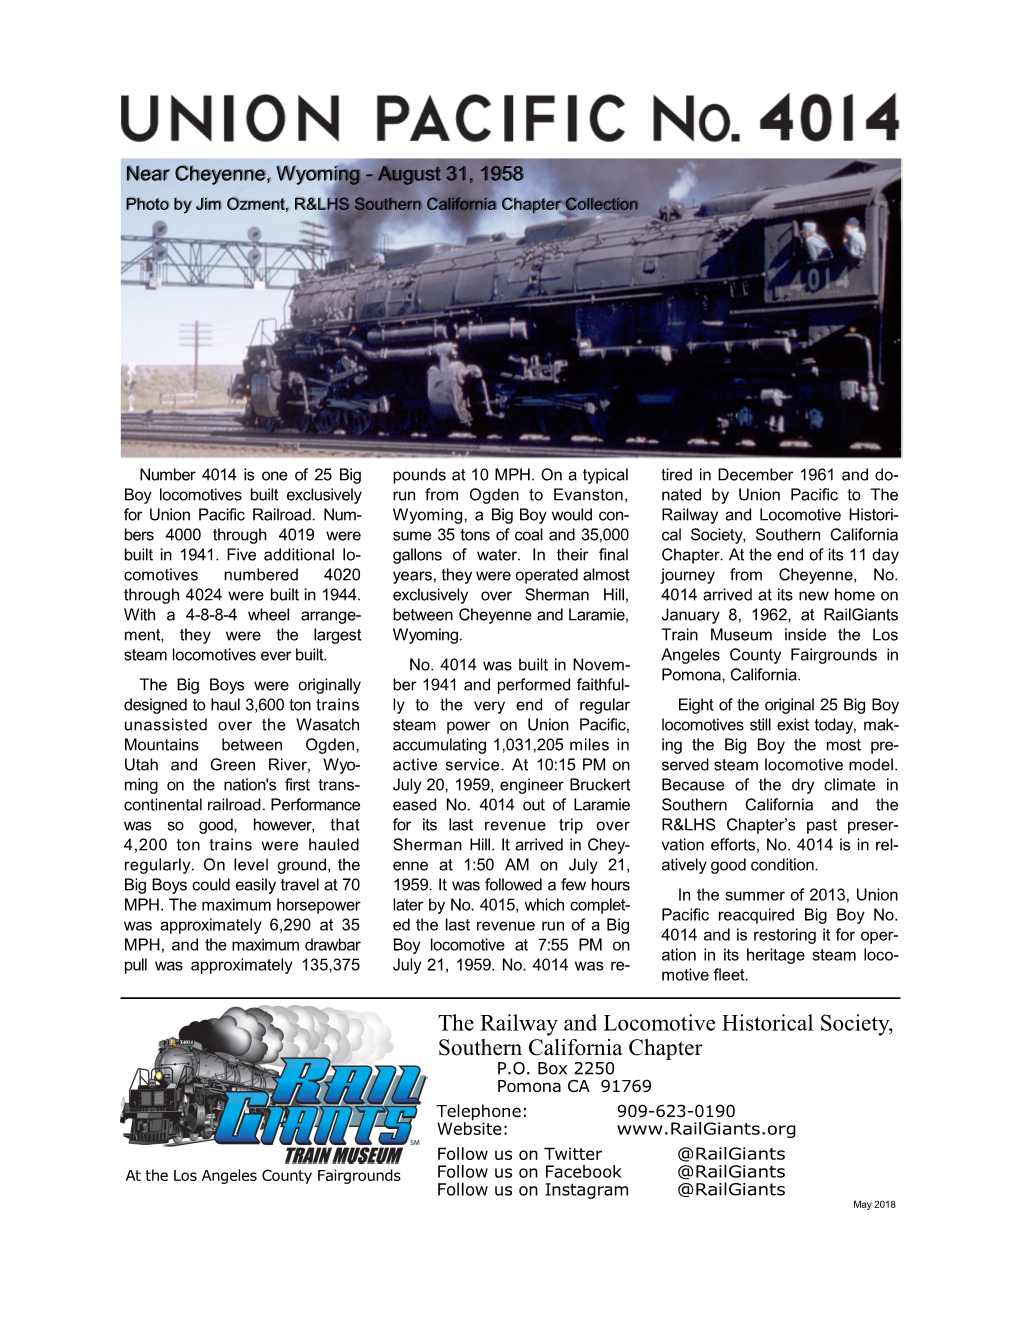 The Railway and Locomotive Historical Society, Southern California Chapter P.O